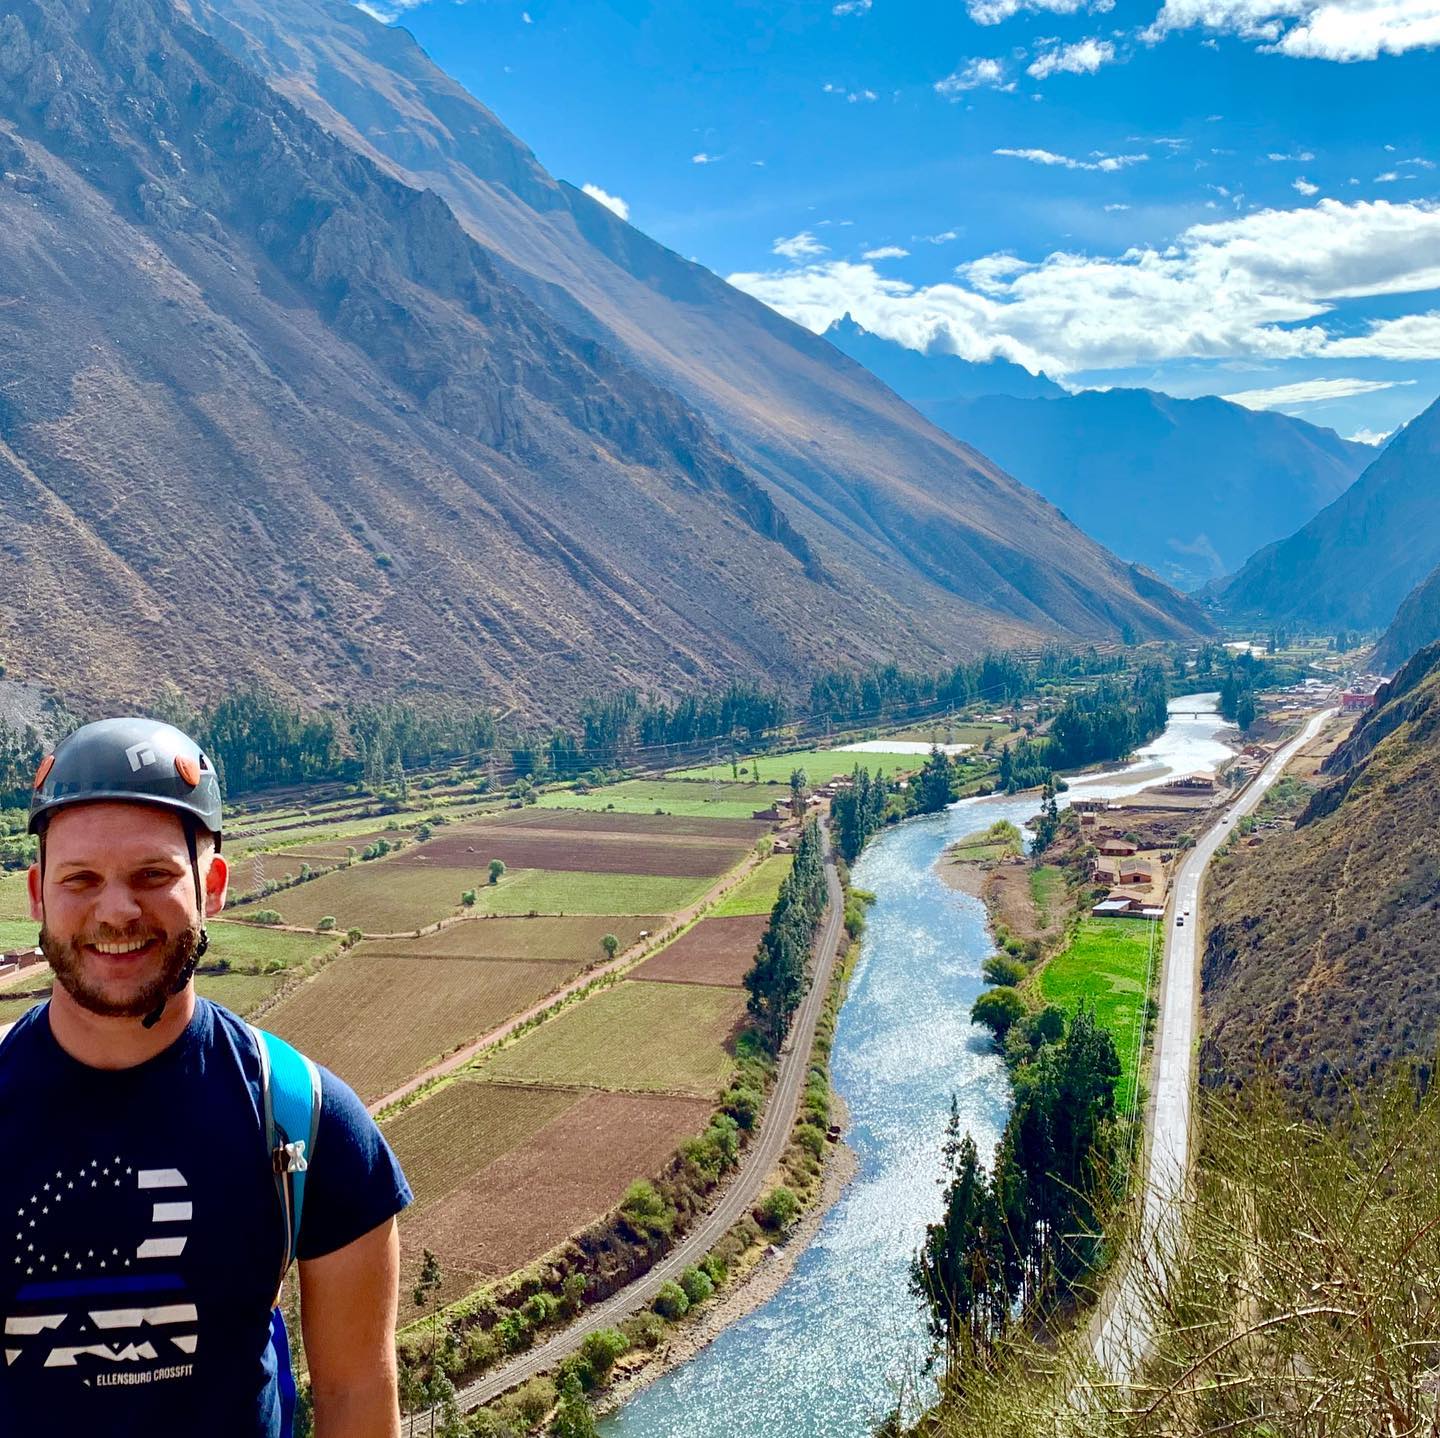 Peru Day 1: might as well rock climb my way to lunch in a cliff kitchen. Cliff lodge is seen in picture #3 to the right. Great toilet, too. We zip lined back down on 6 lines.